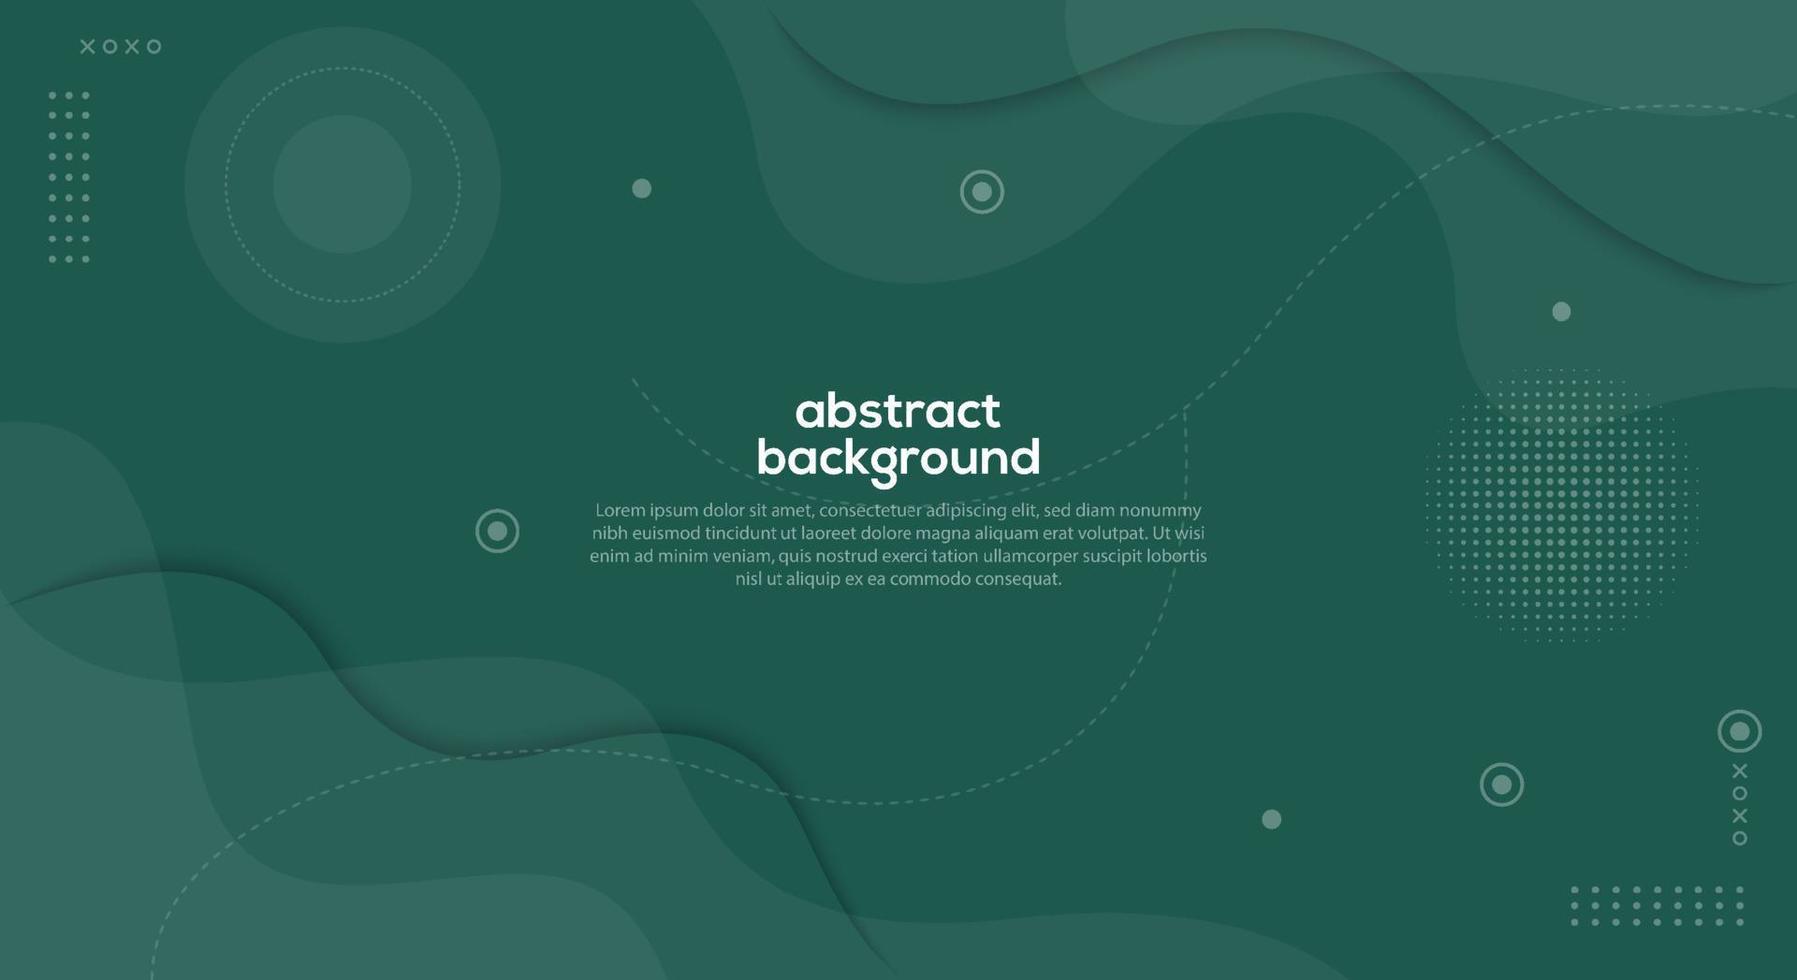 trendy background 2022. Contemporary modern trendy vector illustrations. Every background is isolated. Design with liquid shape.